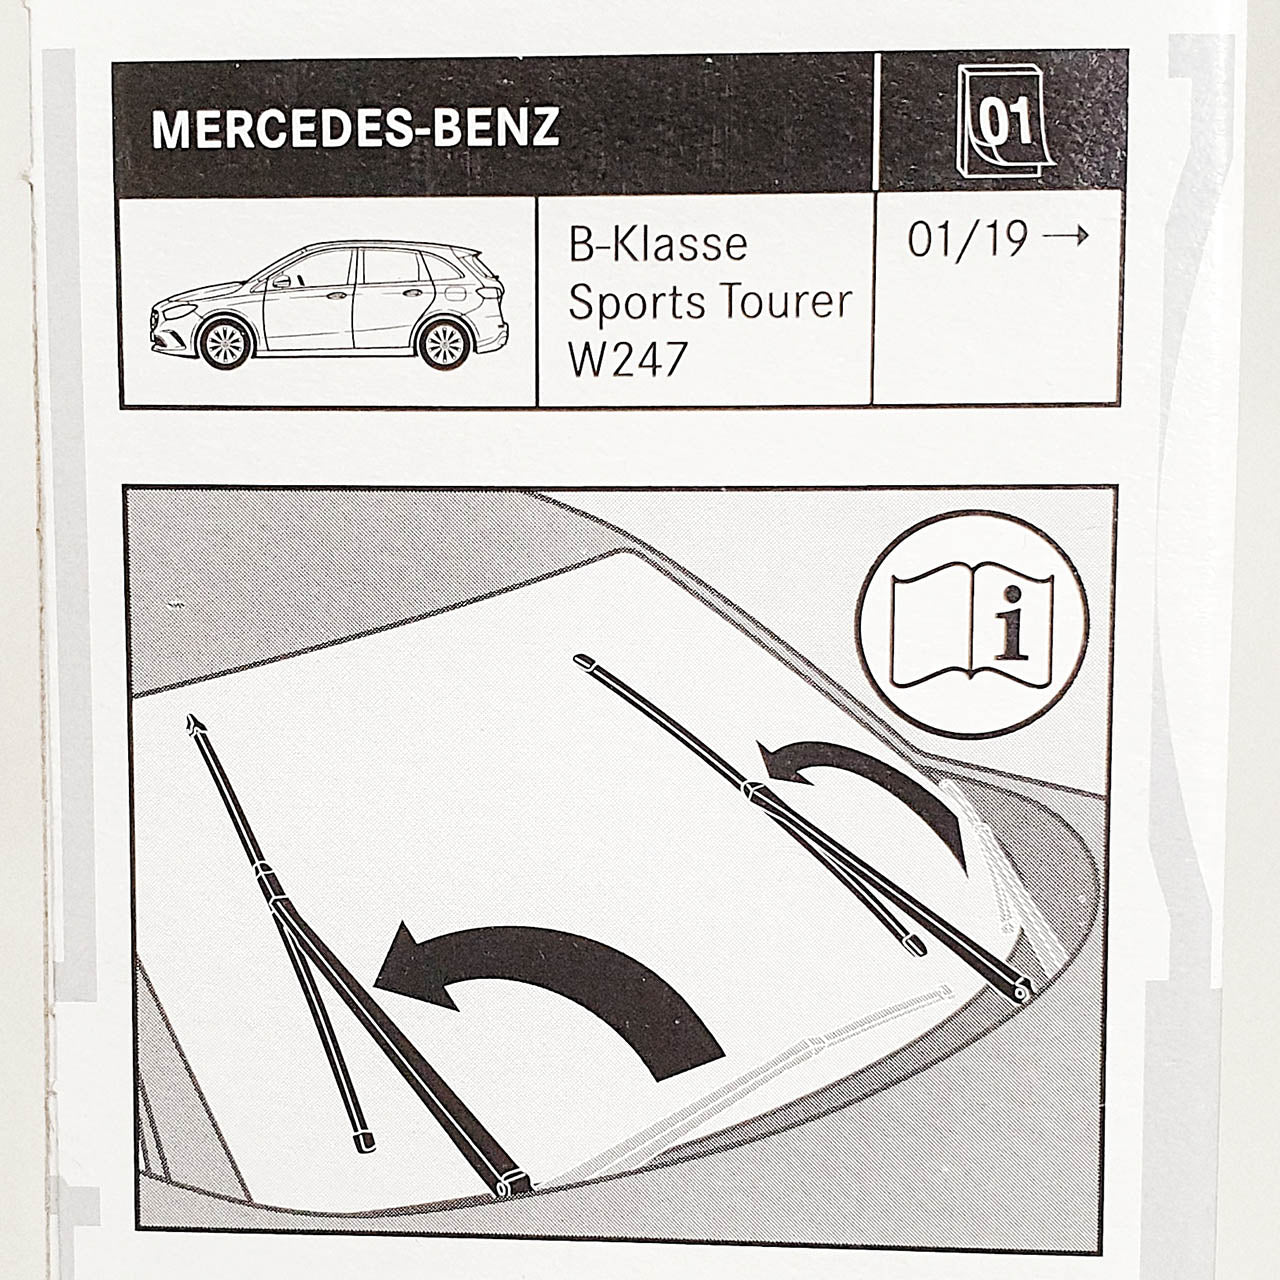 Genuine Mercedes-Benz A Class B Class front wiper blades for 247 models